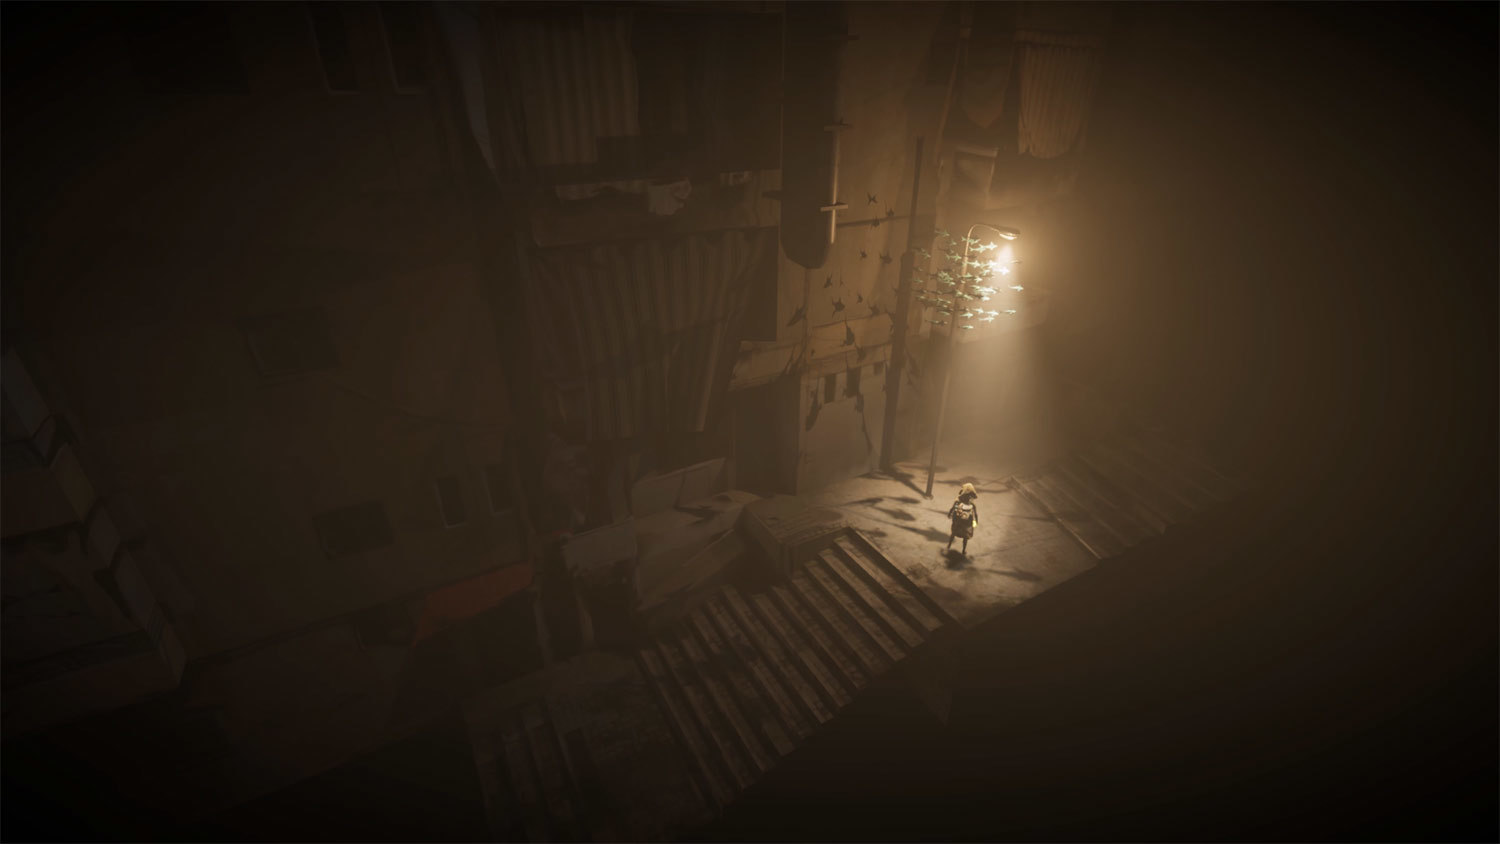 Screenshot of character in a dark alley from third-person indie game Where Turtles Fly